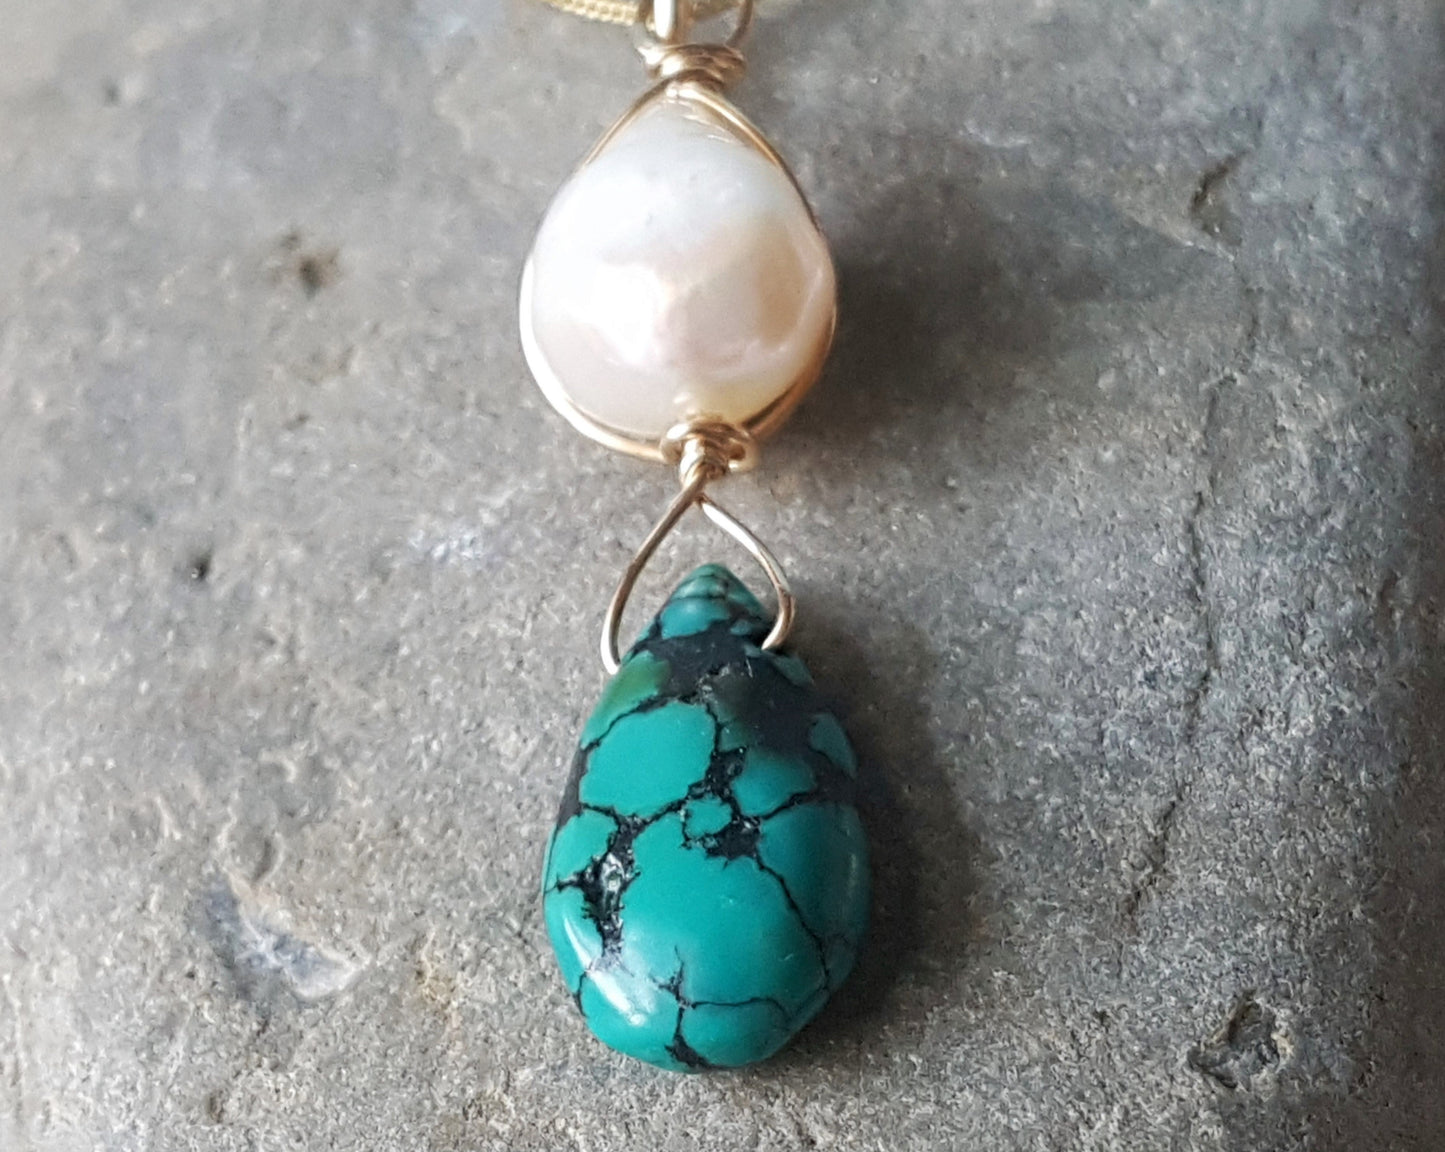 Baroque Pearl Turquoise Pendant with fine 14k Gold Filled curb chain, a Large White Freshwater Cultured Pearl and Turquoise drop shaped stone, wire wrapped with Gold Filled wire. 